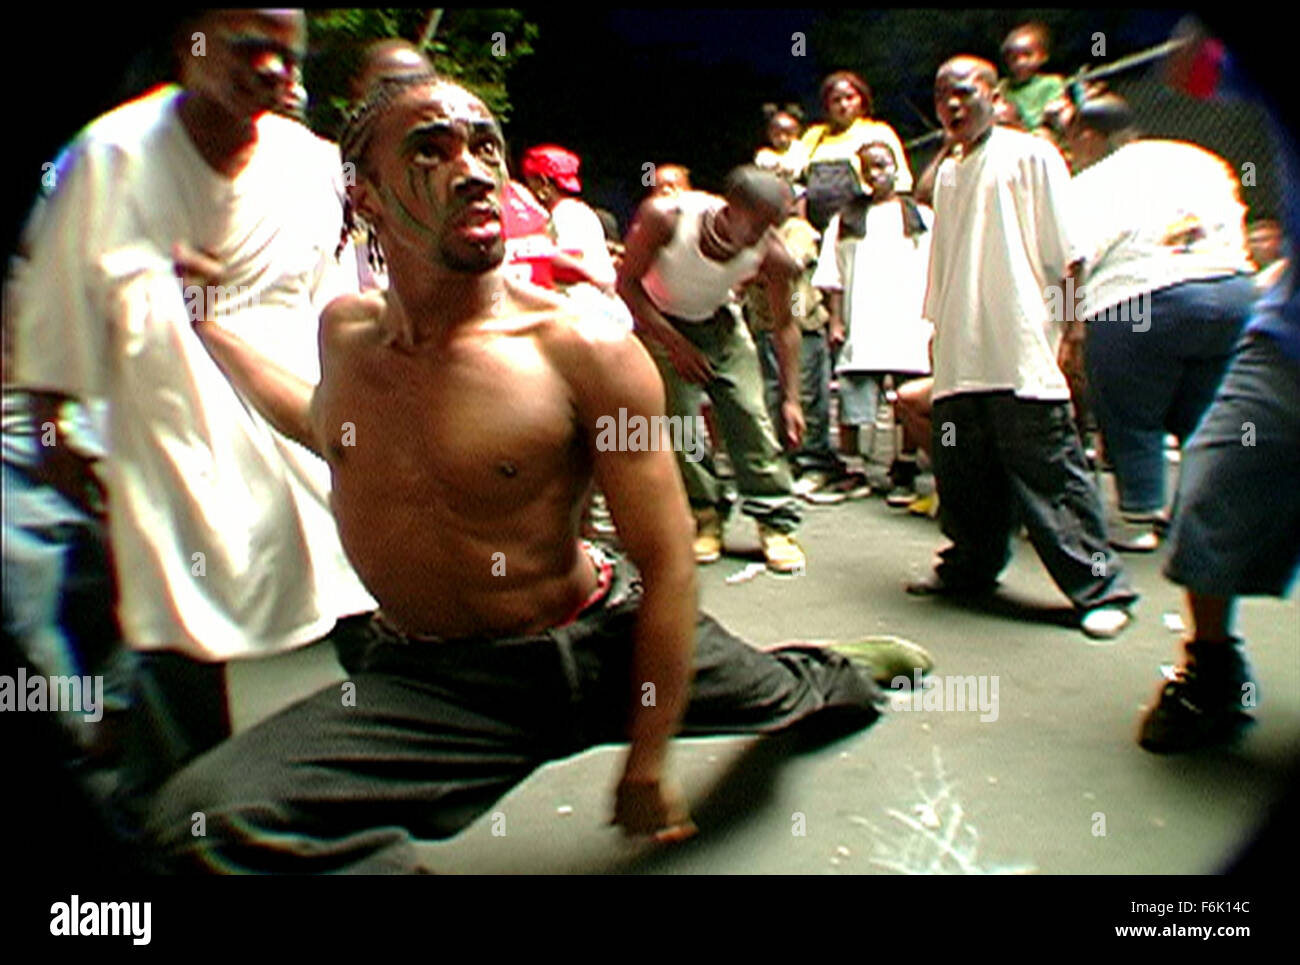 RELEASE DATE: June 24, 2005   MOVIE TITLE: Rize   STUDIO: HSI Productions   PLOT: Rize chronicles a dance movement that rises out of South Central Los Angeles with roots in clowning and street youth culture. Directed by David LaChapelle.   PICTURED: Dance scene from the movie.   (Credit Image: c HSI Productions/Entertainment Pictures) Stock Photo